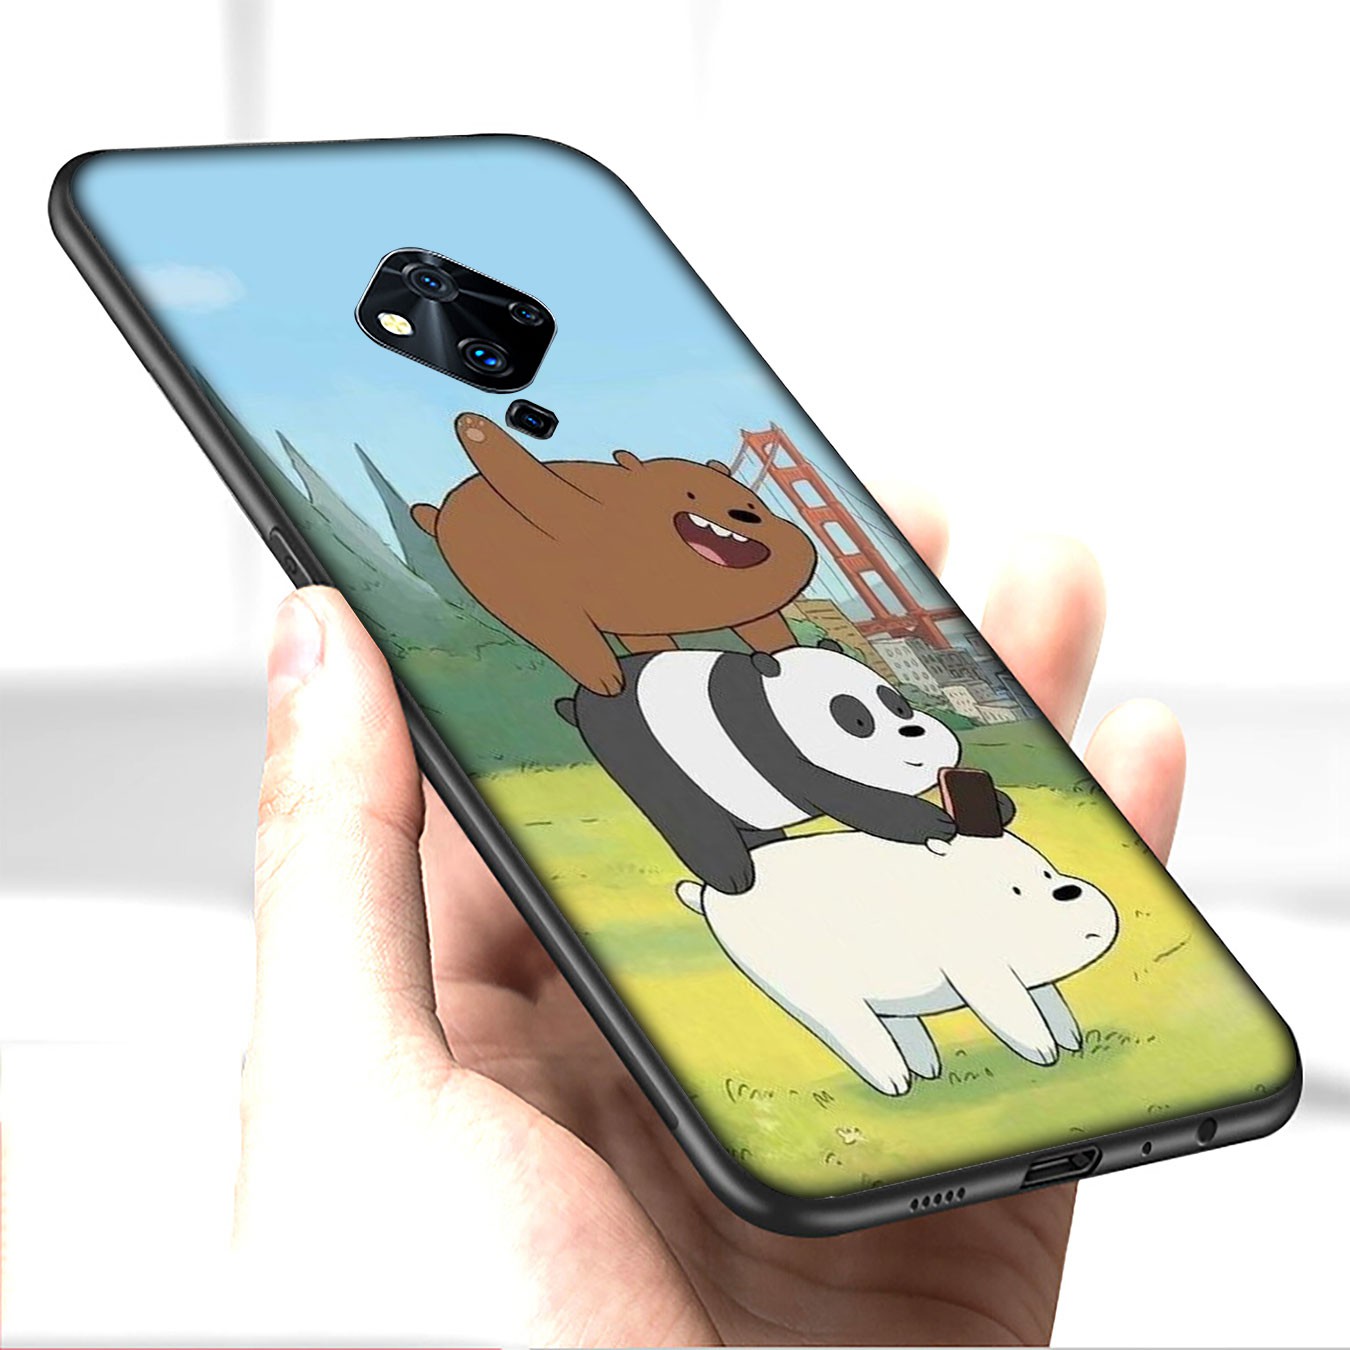 Samsung Galaxy A02S J2 J4 J5 J6 Plus J7 Prime A02 M02 j6+ A42 + Casing Soft Silicone H32 Cute We Bare Bears Phone Case